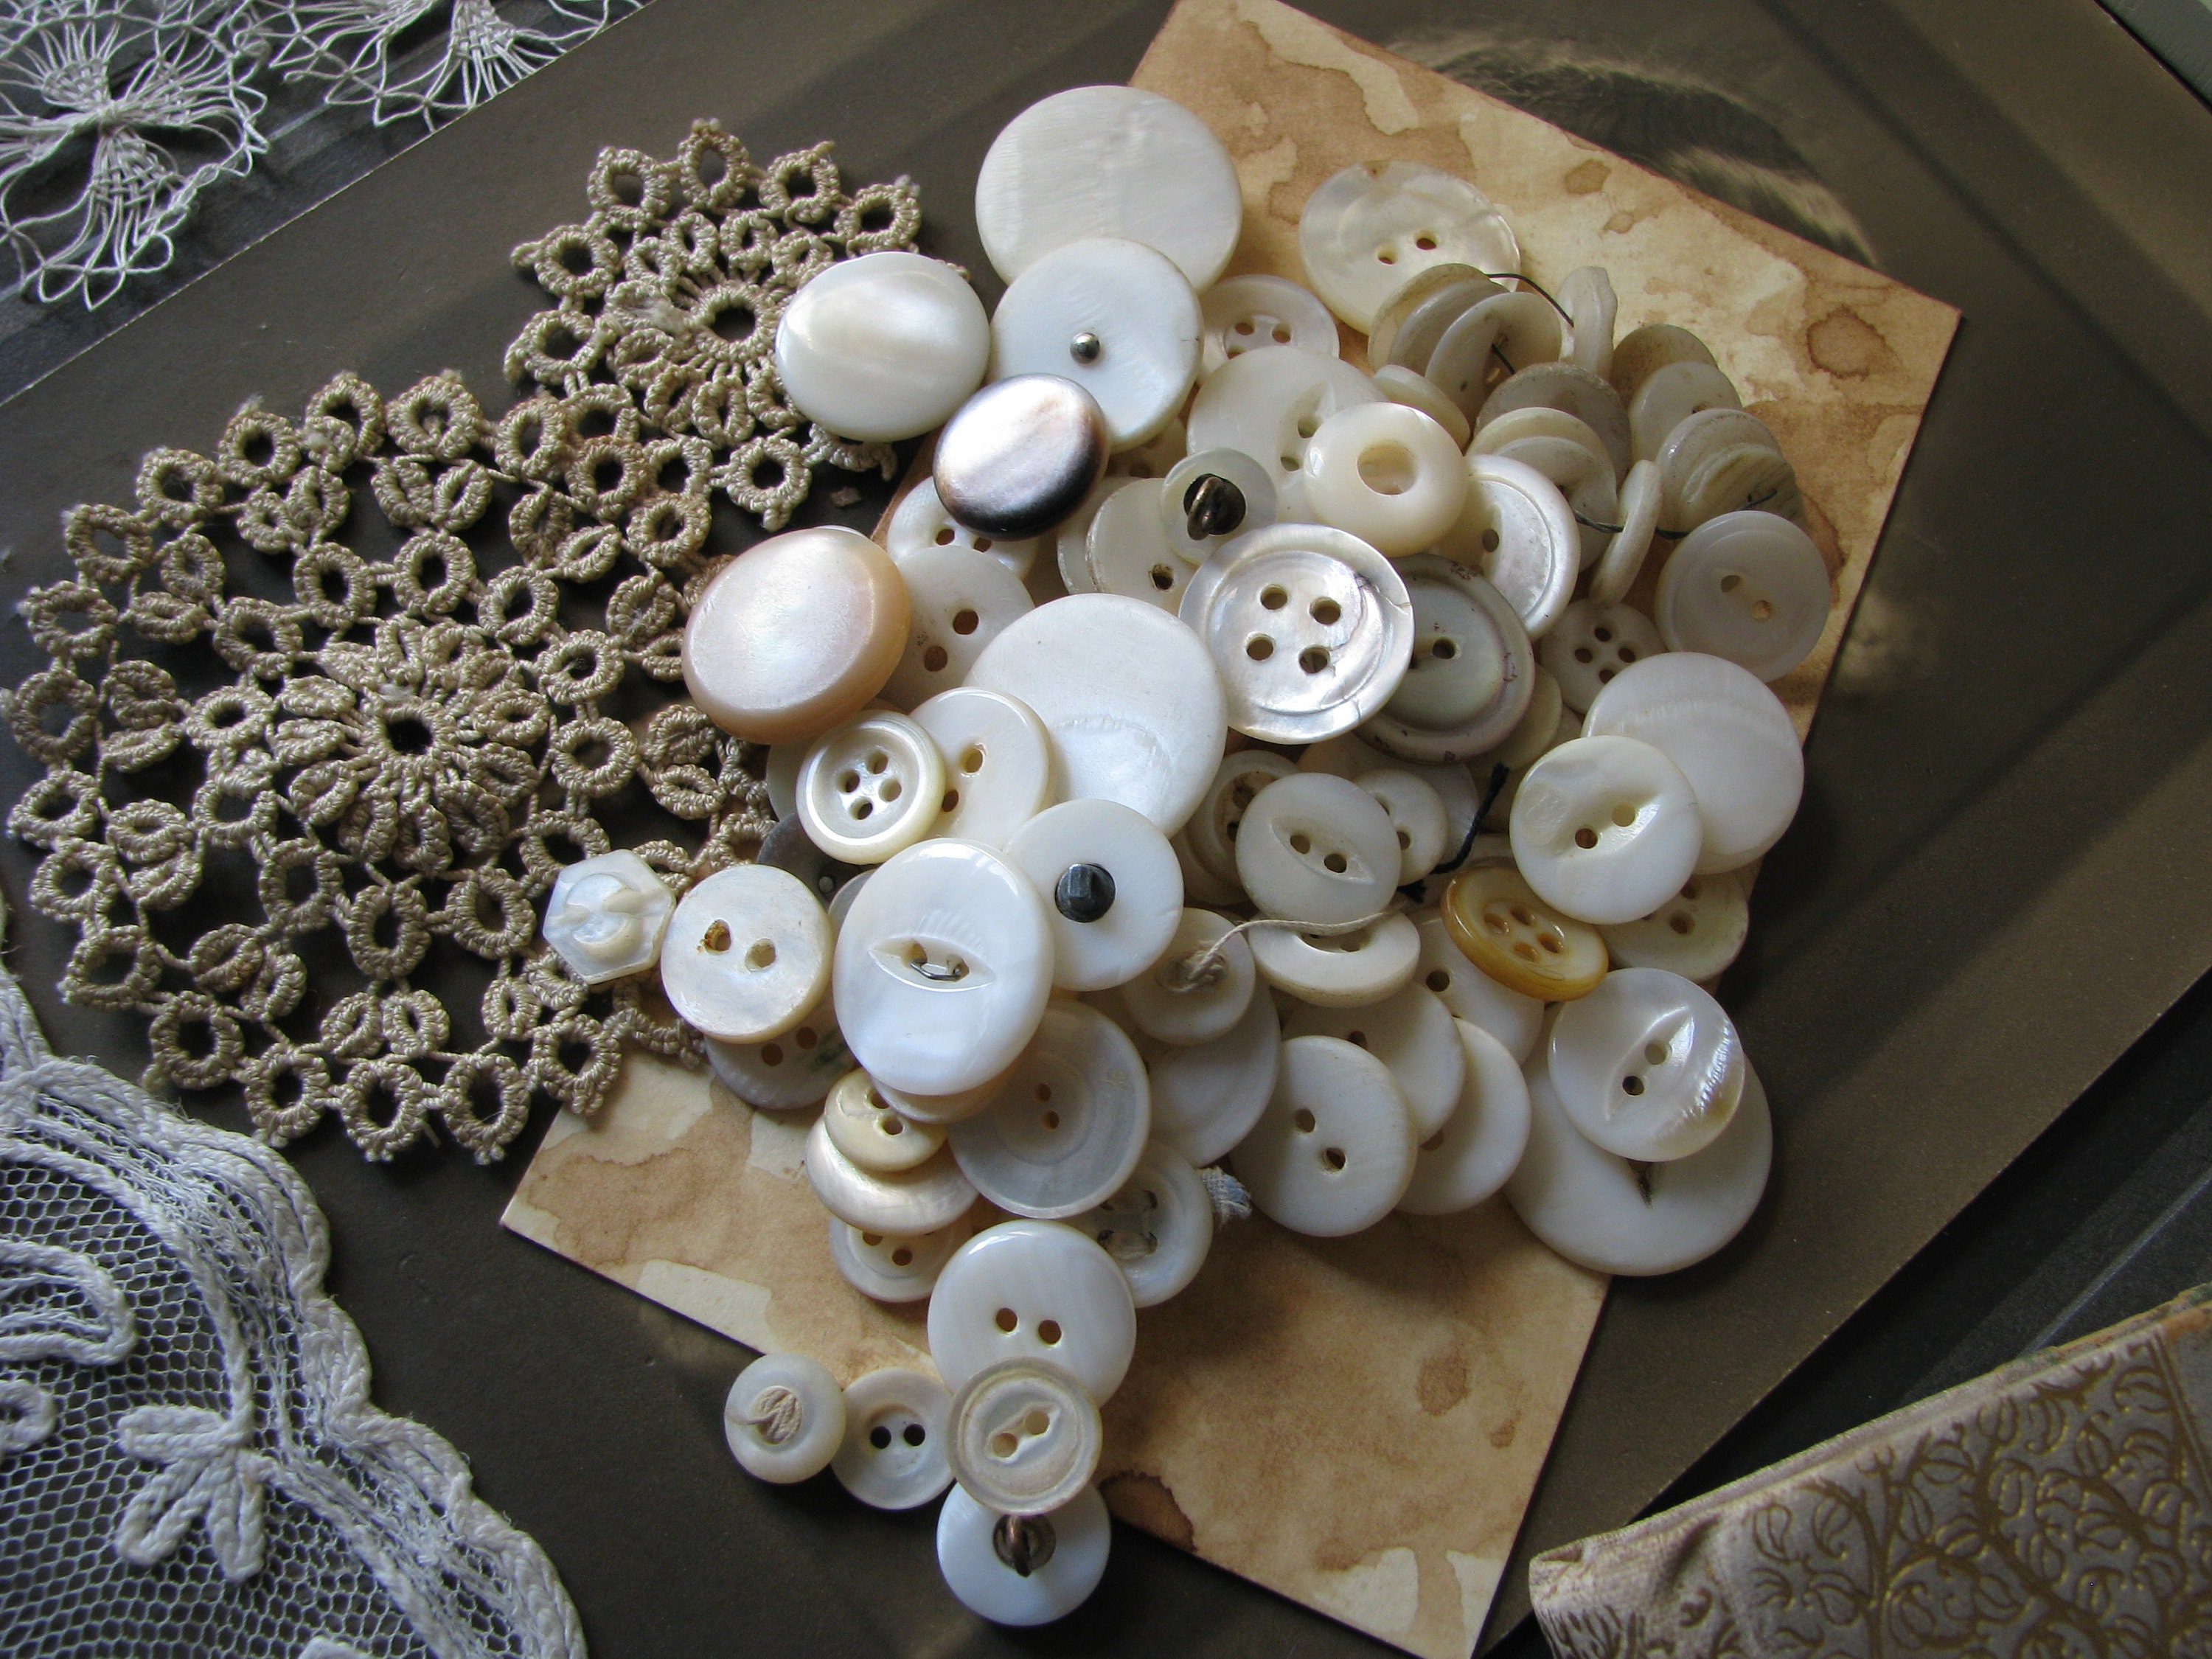 Antique Pearl Buttons 100 Antique Shell Buttons Antique Sewing Buttons 100 Antique Mother of Pearl Buttons